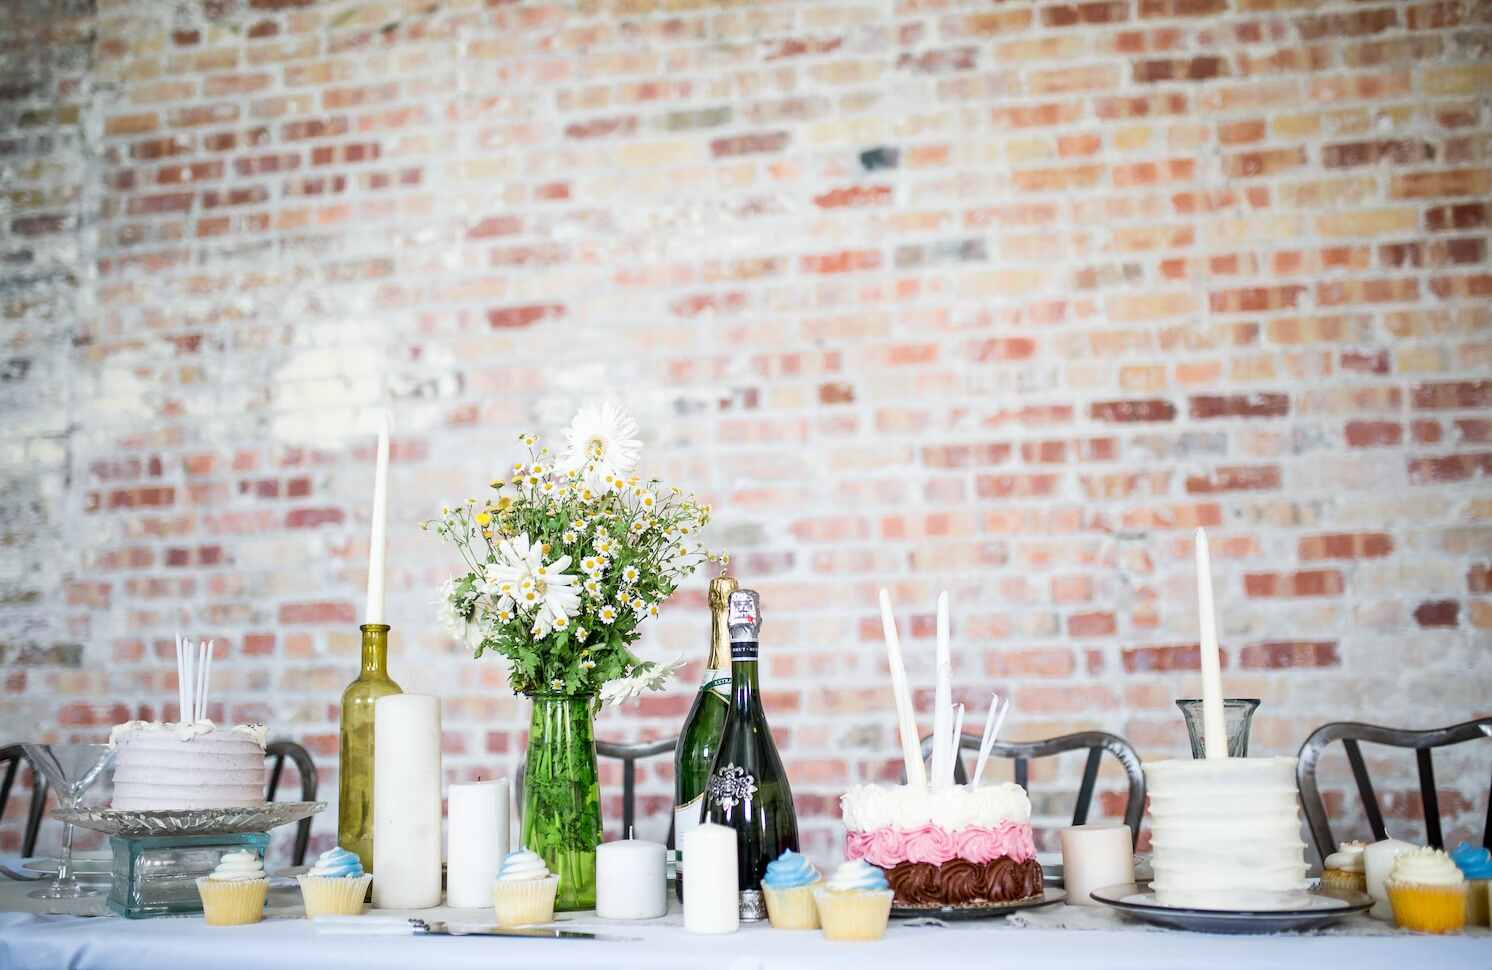 A brunch table set with champagne, cakes, and cupcakes.